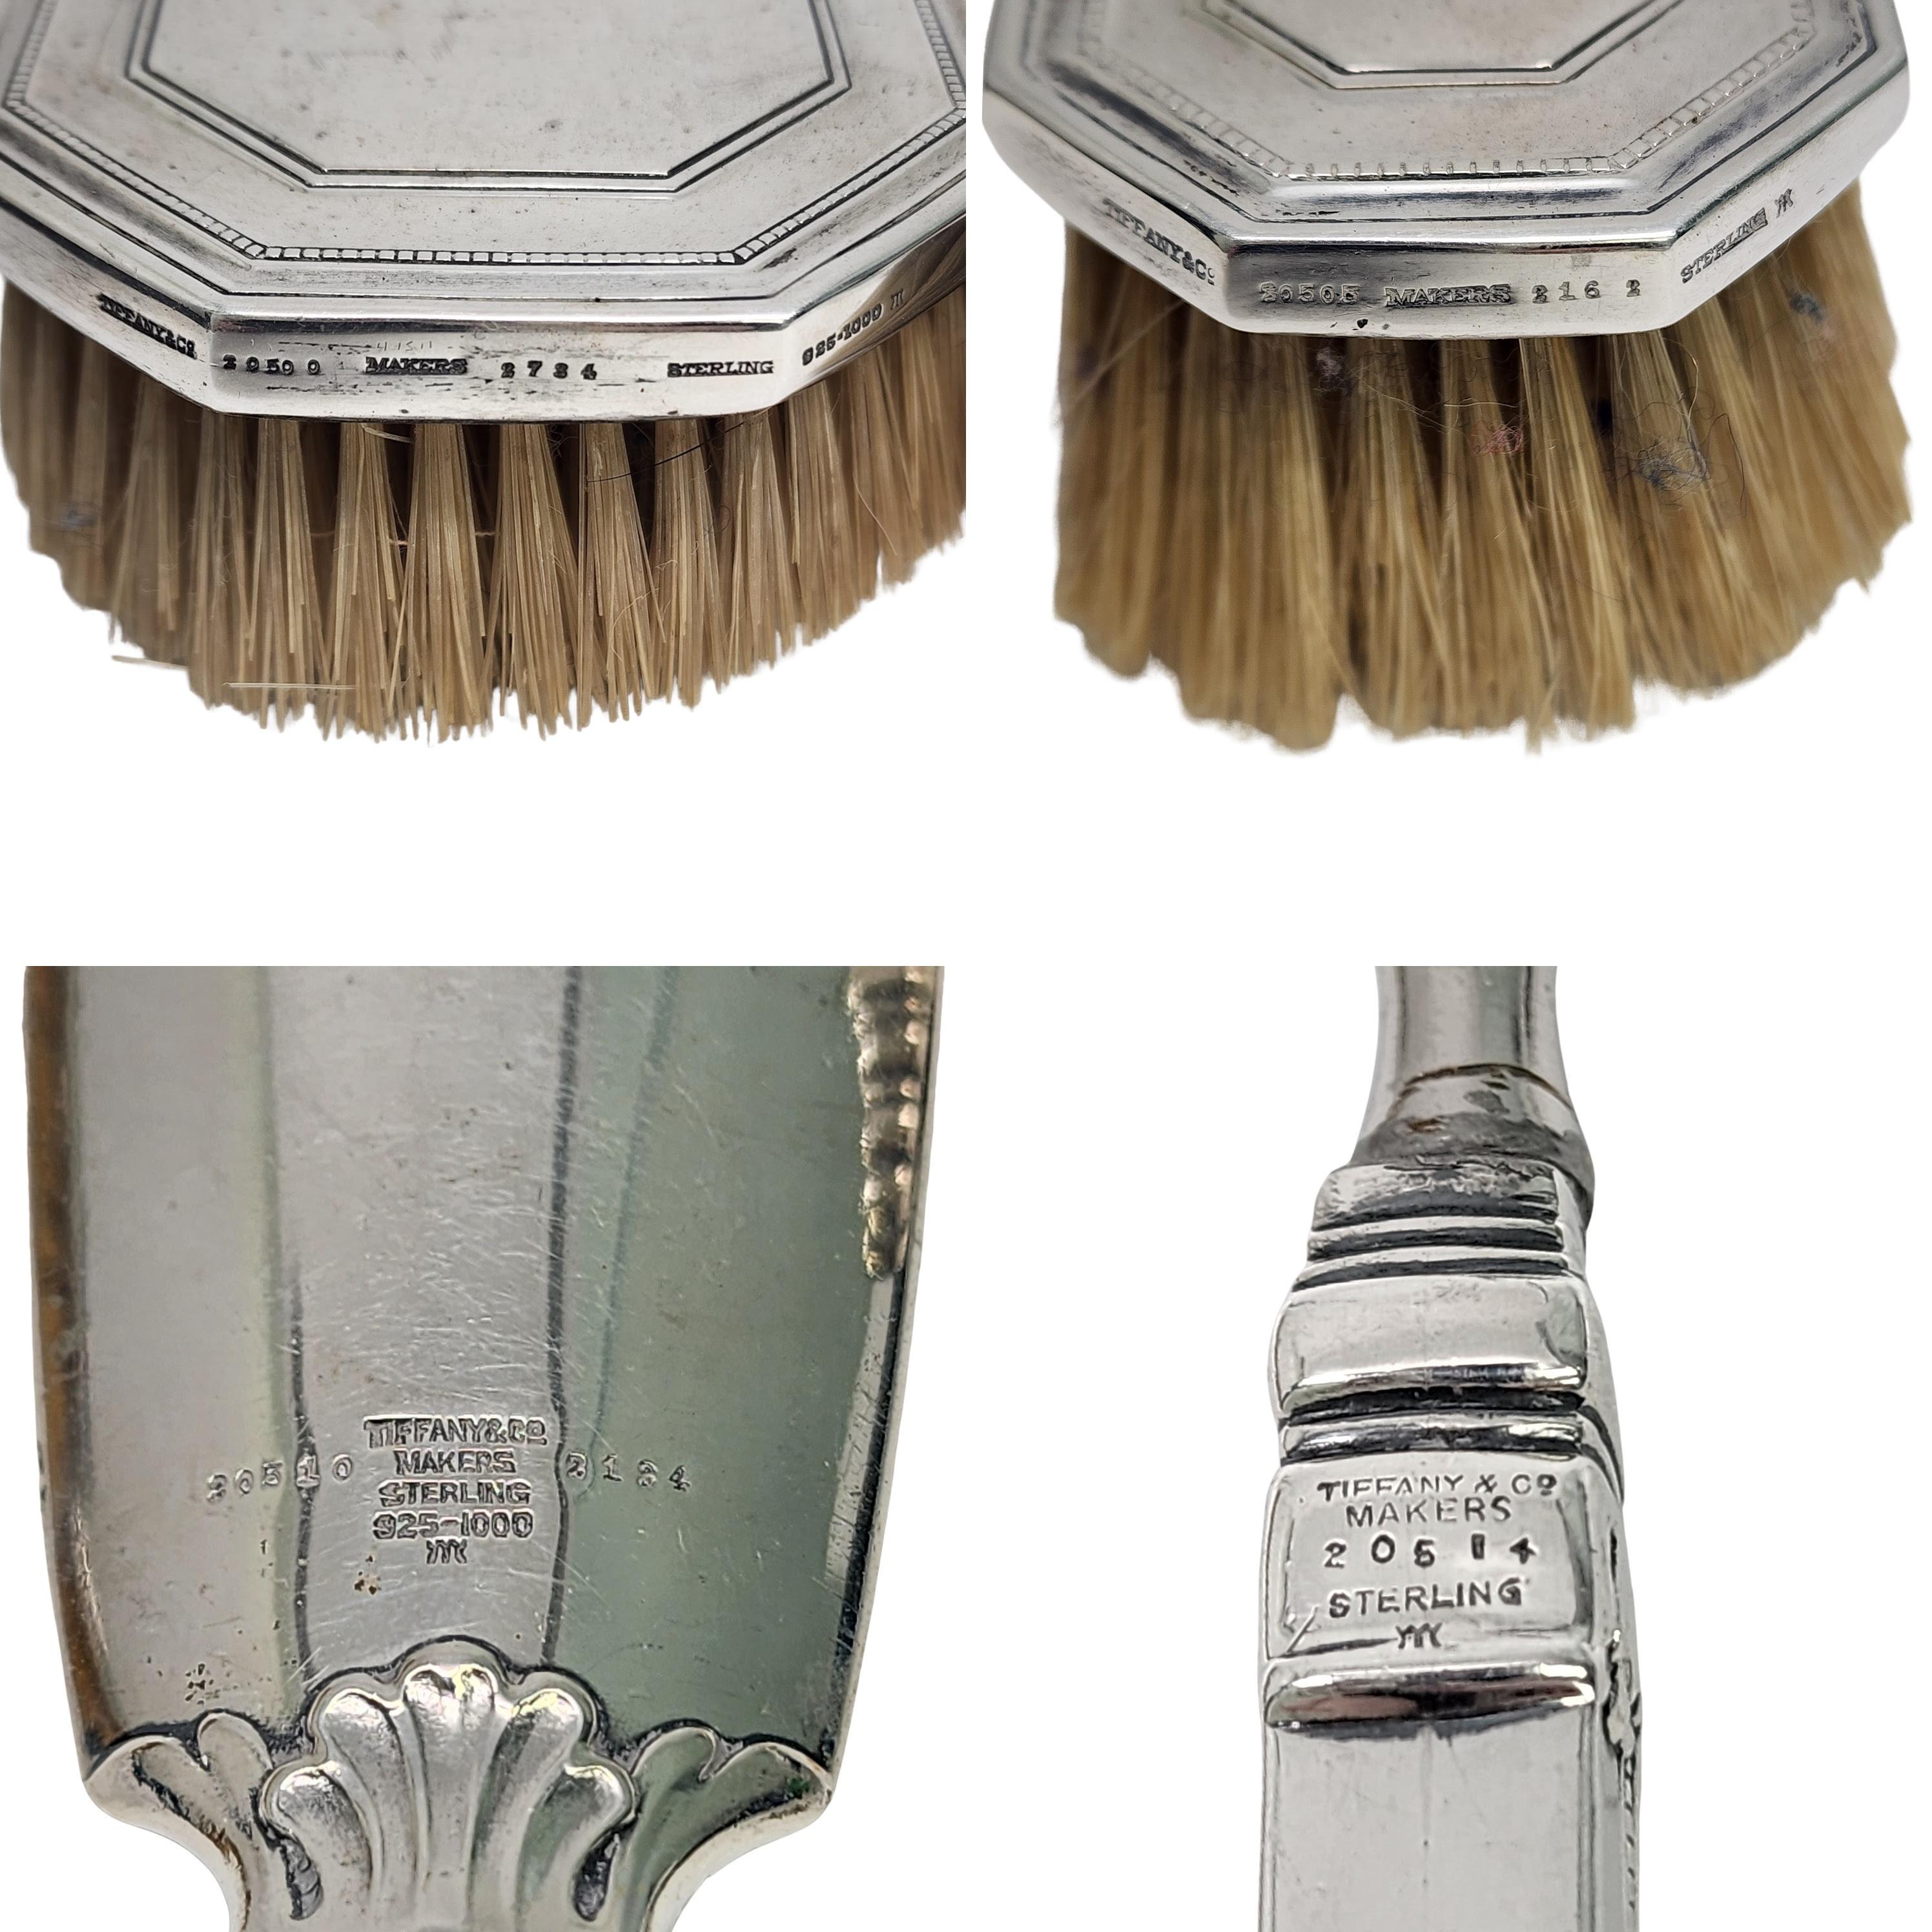 Tiffany & Co Sterling Silver 4pc Vanity Set Brushes Shoe Horn File w/Mono #16109 For Sale 5